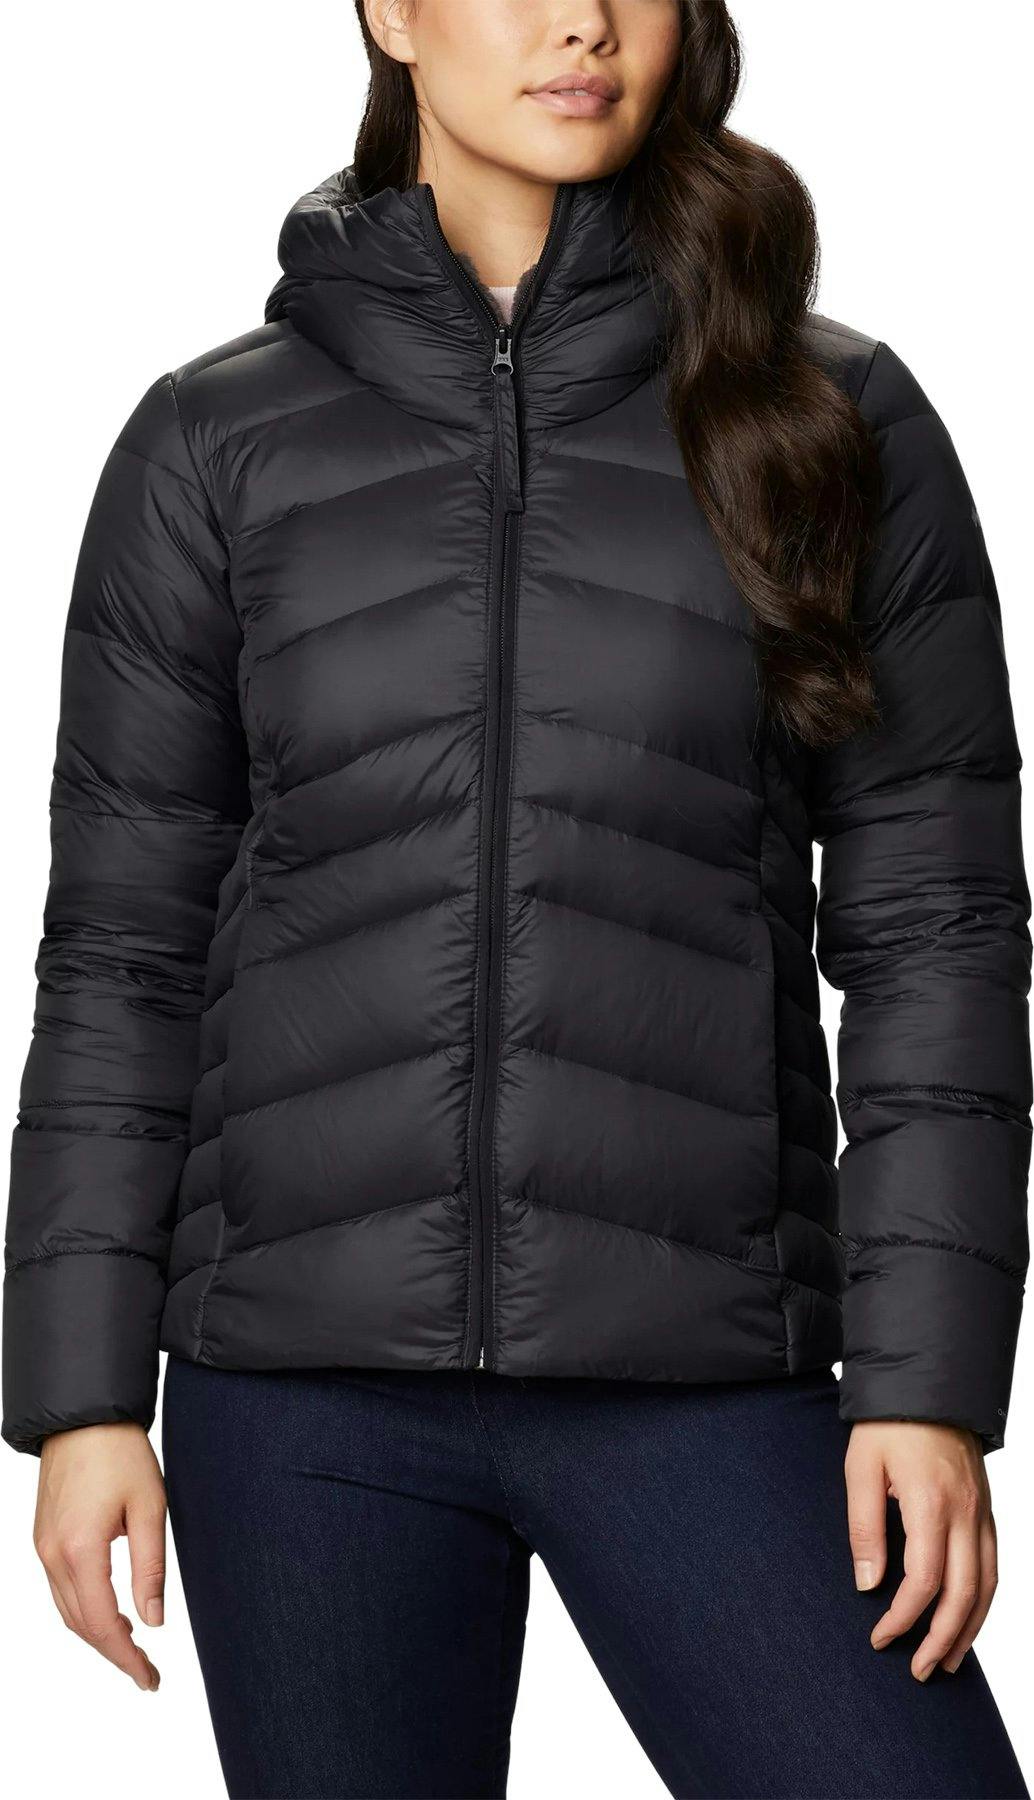 Product image for Autumn Park Down Hooded Jacket - Women's